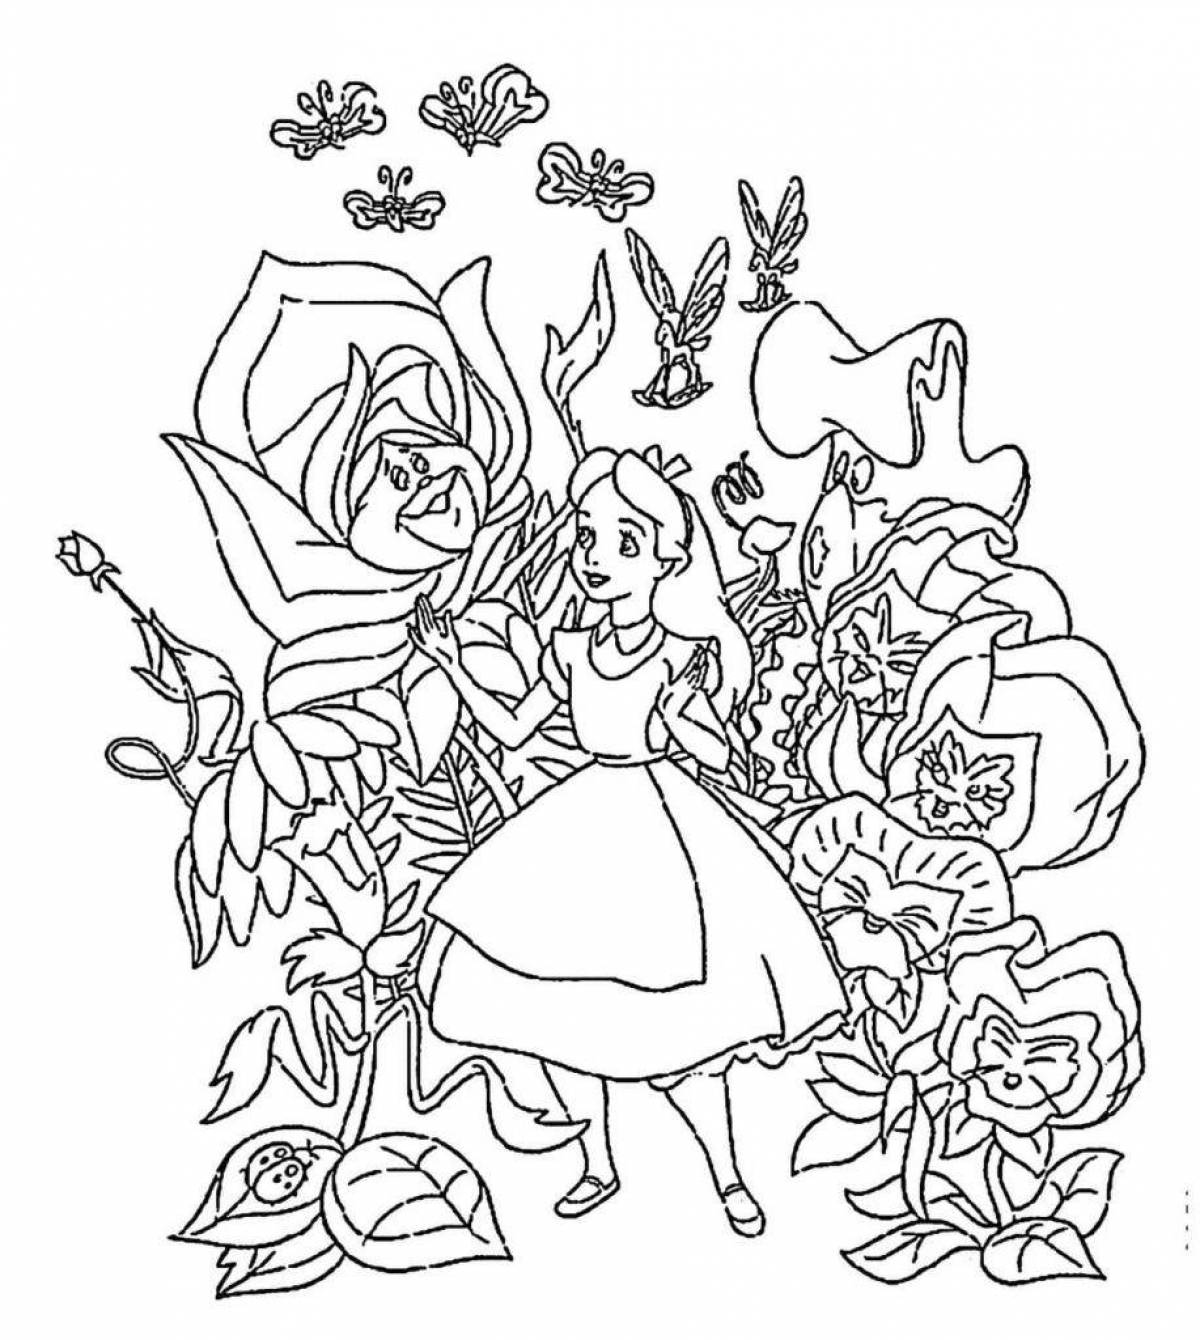 Bright alice find coloring page